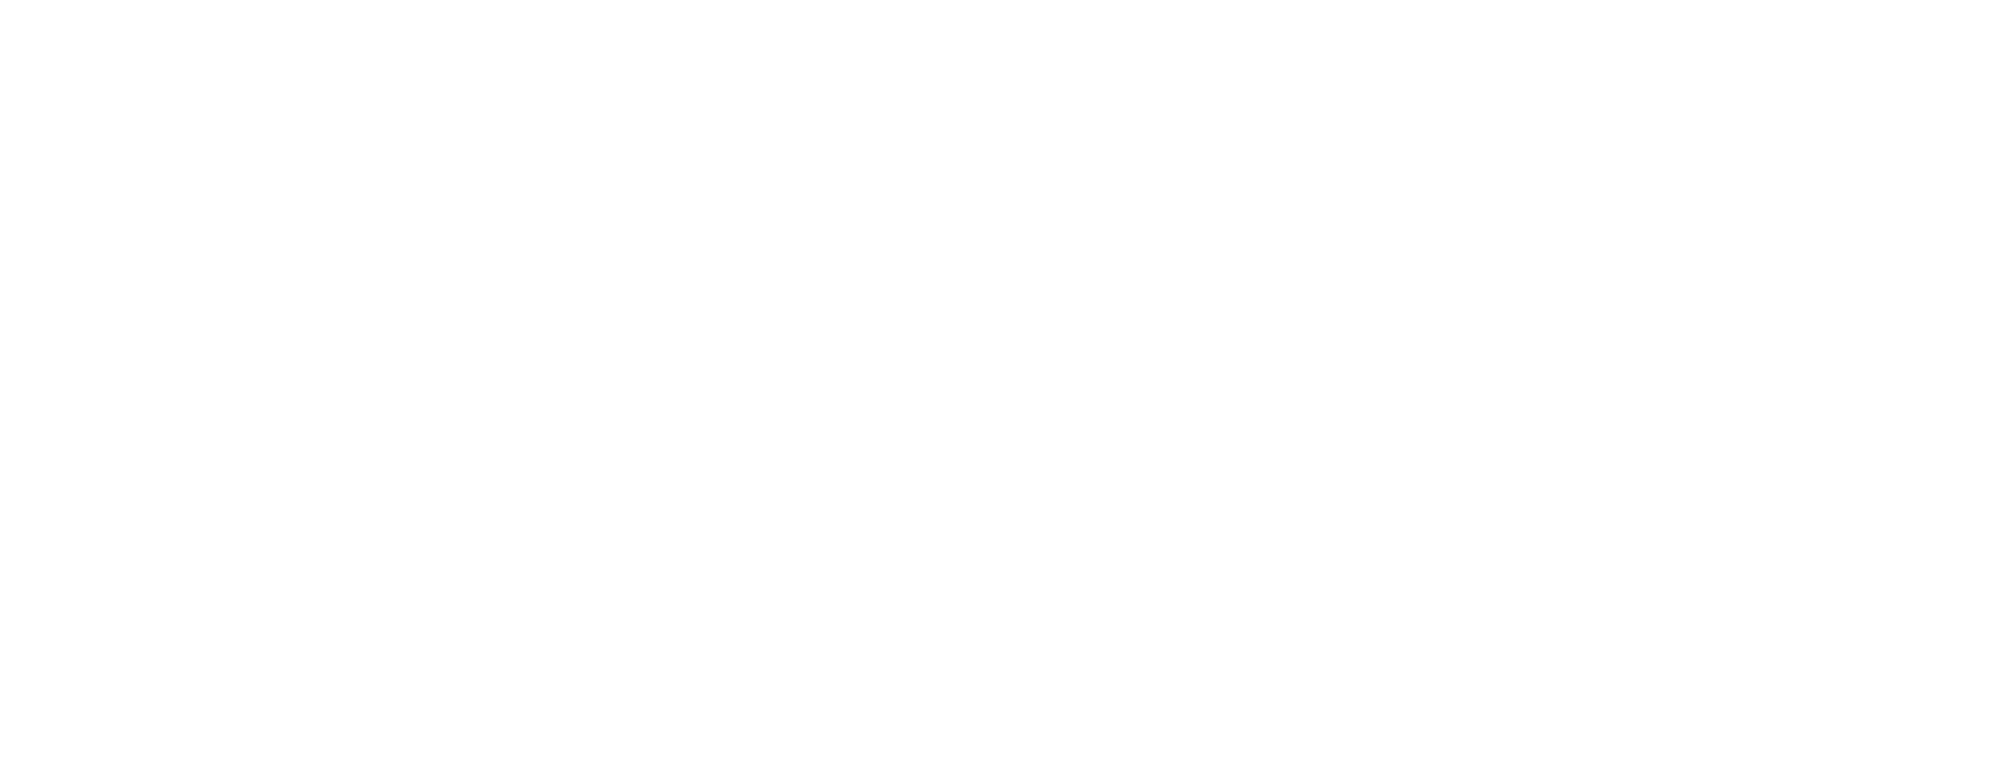 OpenFF Toolkit 0.10.6+0.g37d6806b.dirty documentation logo